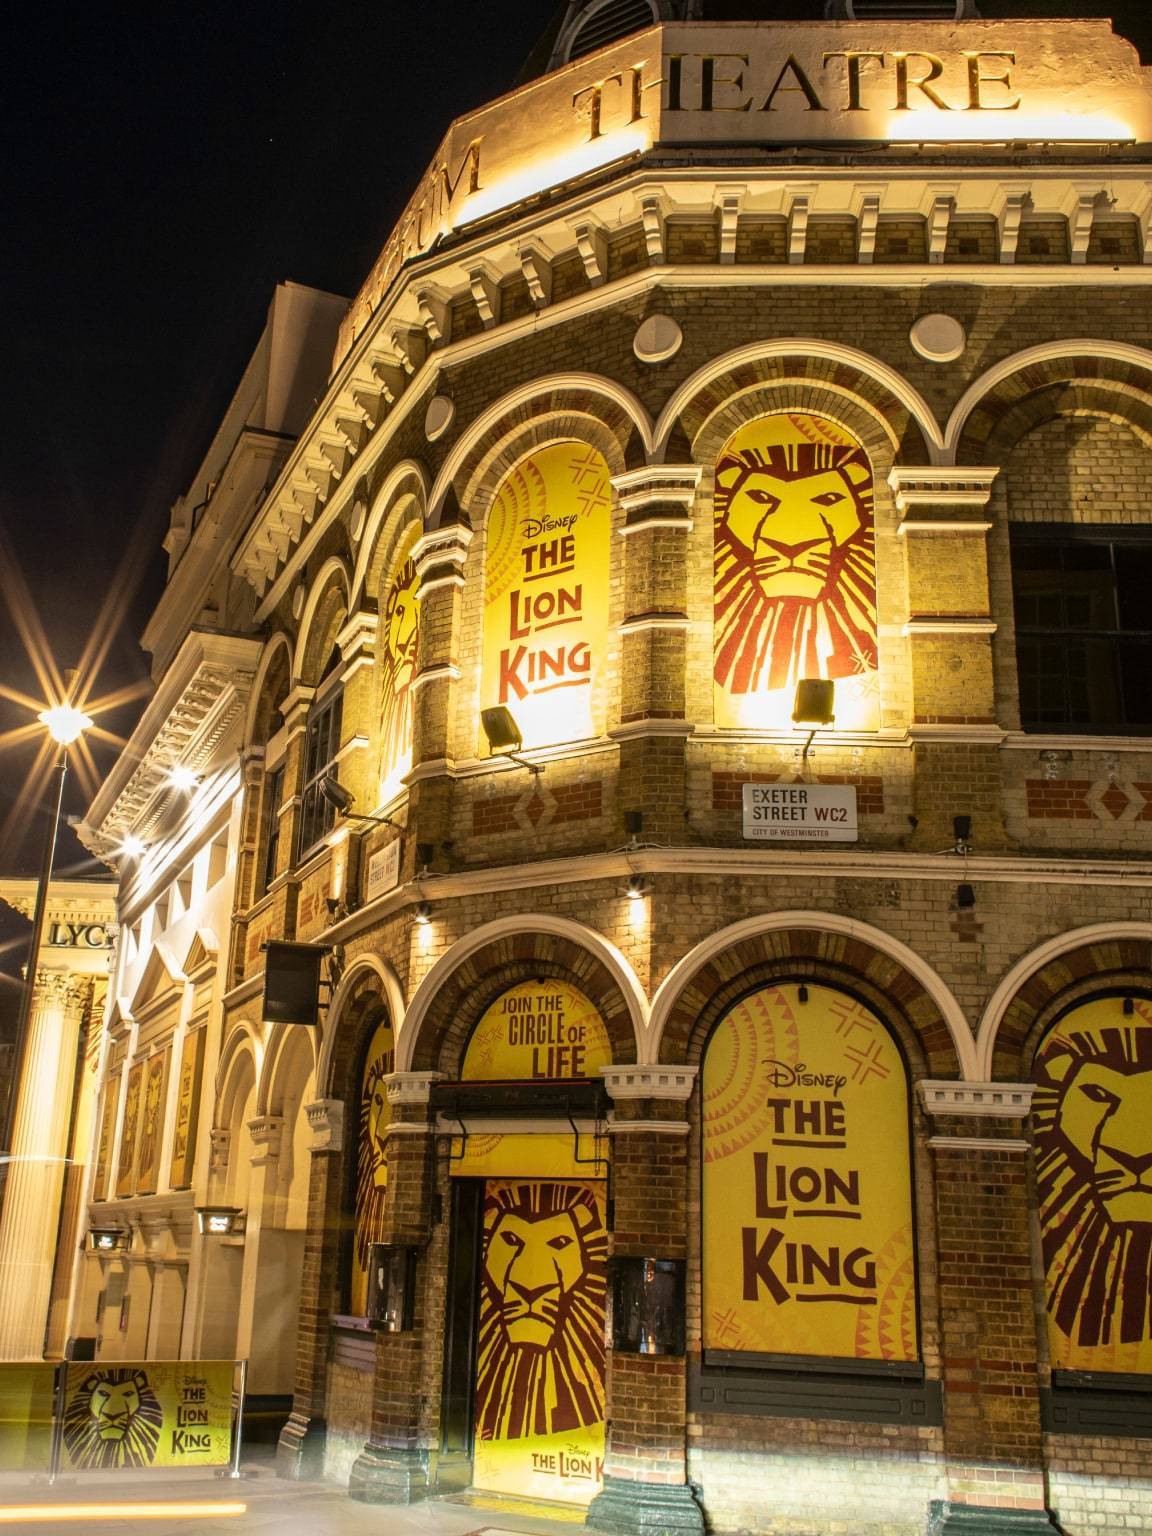 The exterior of the Lyceum Theatre at night with The Lion King posters lit up with lights. 